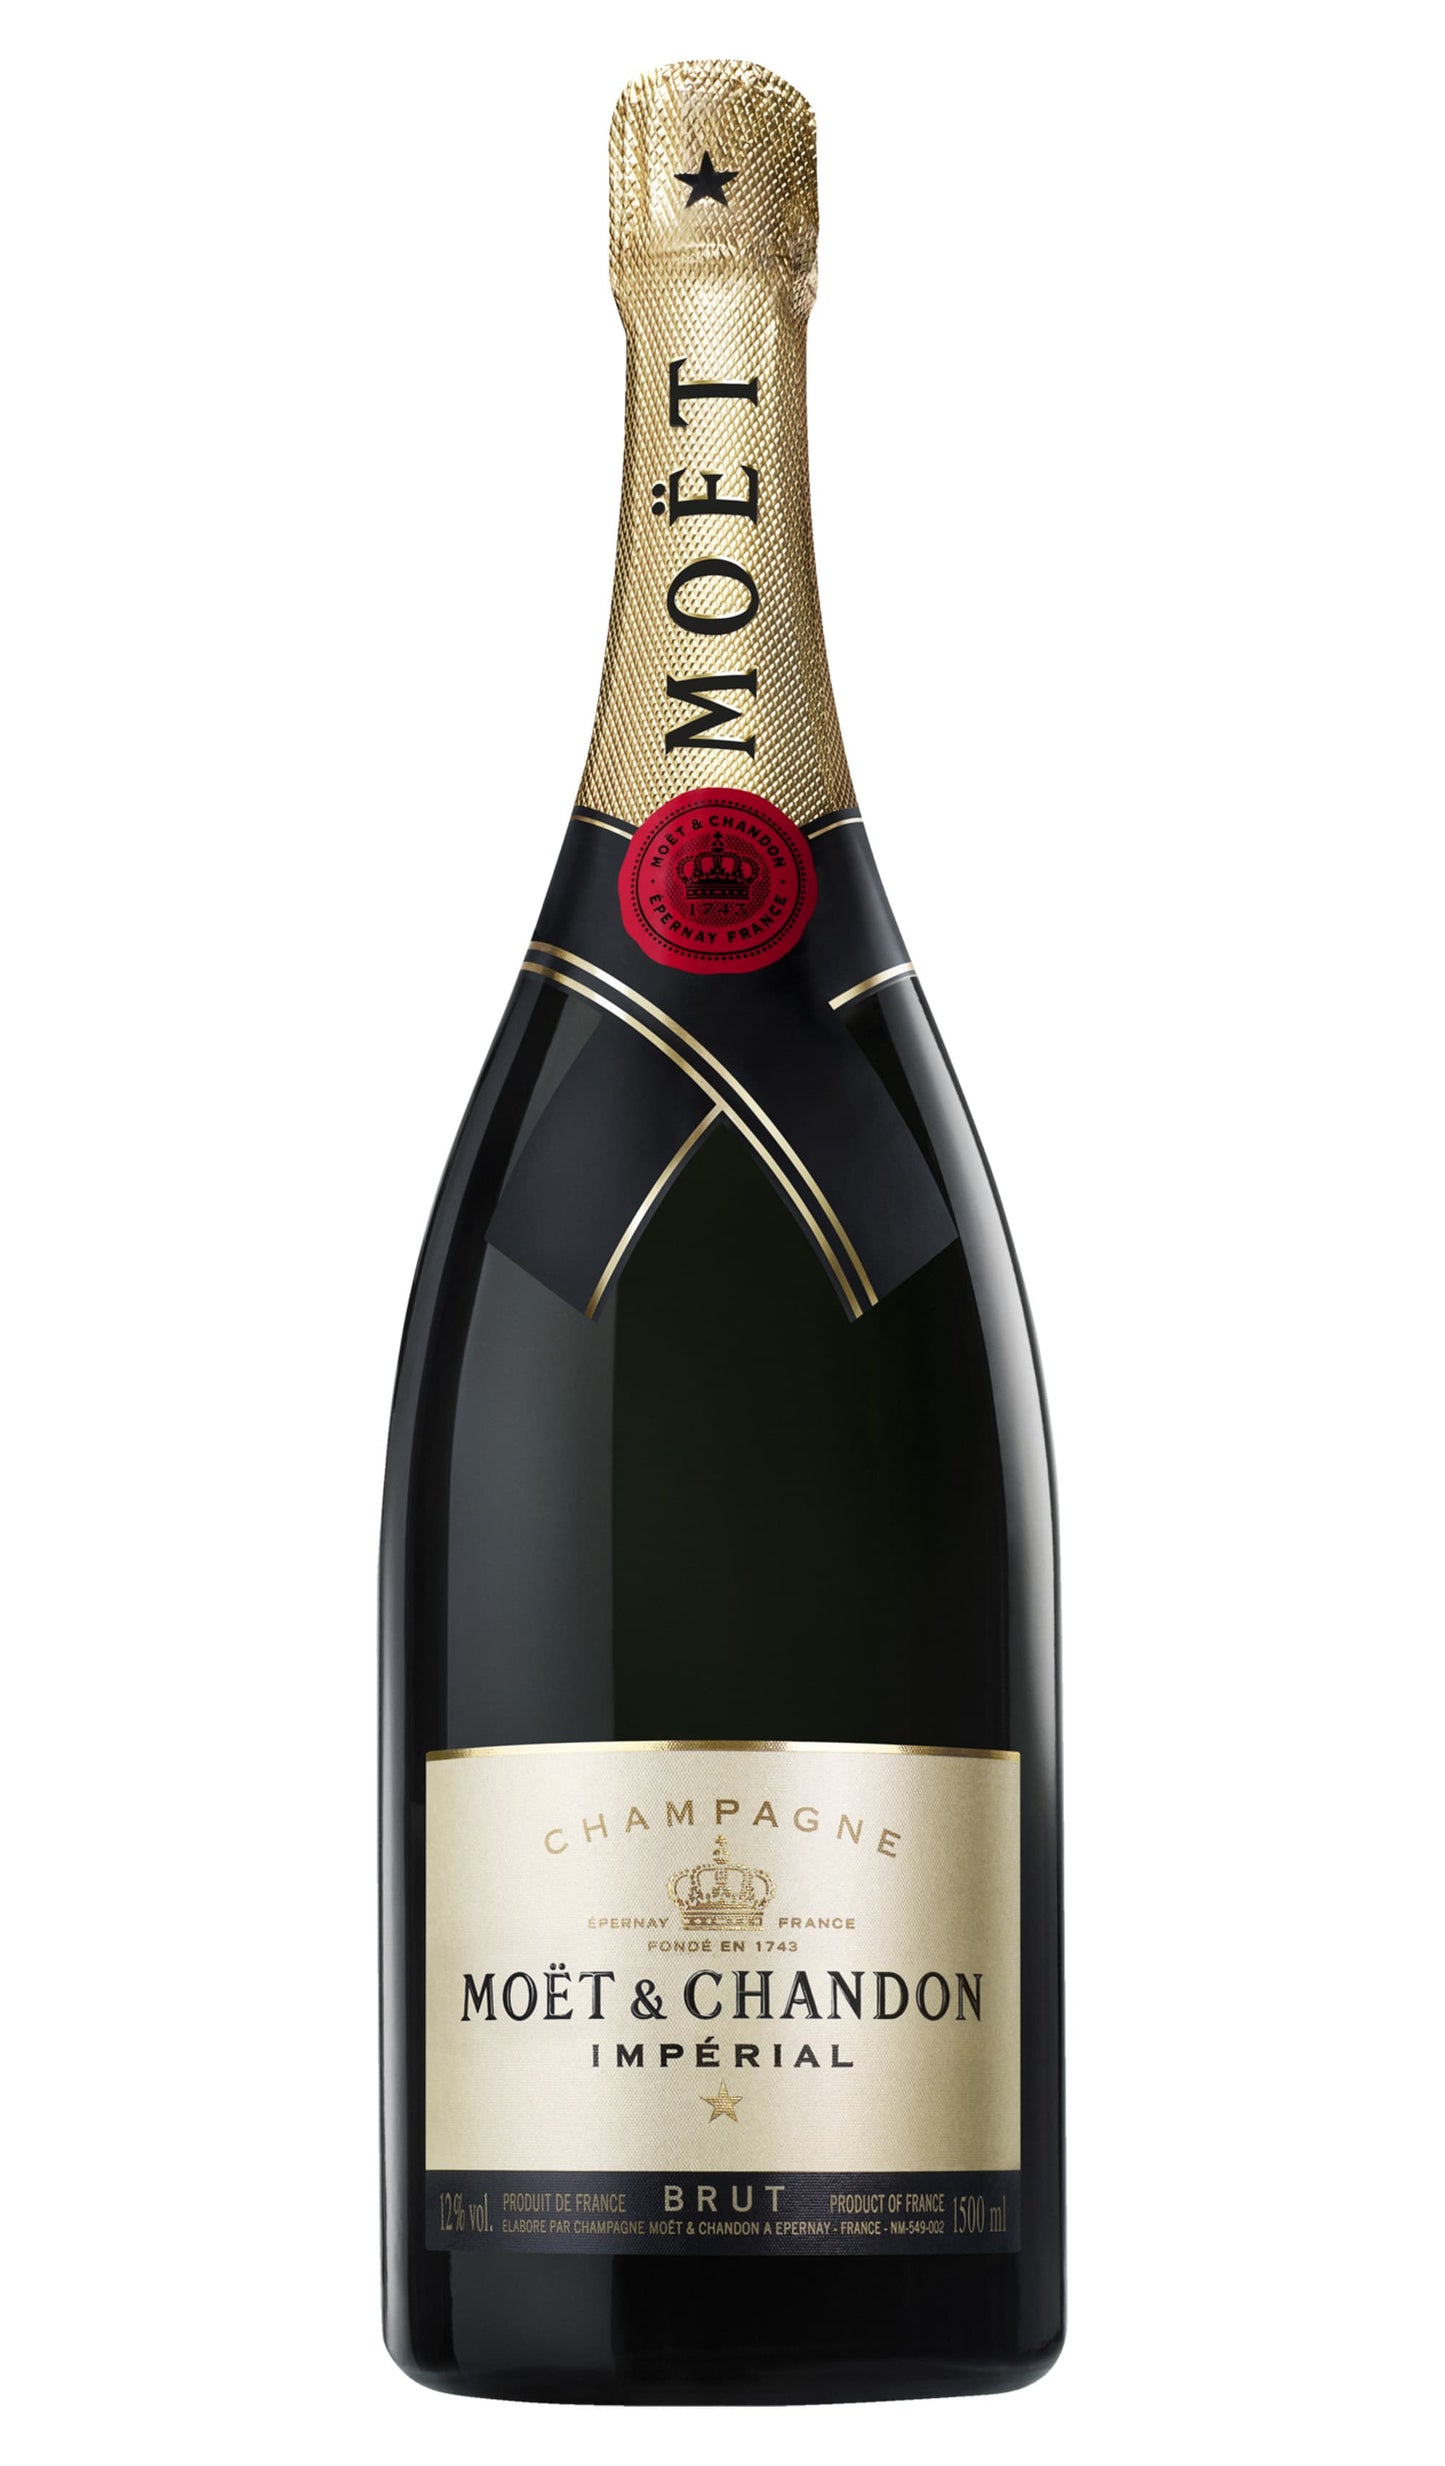 Find out more or buy Moët & Chandon Impérial Brut Champagne Magnum 1.5L online at Wine Sellers Direct - Australia’s independent liquor specialists and the best prices.